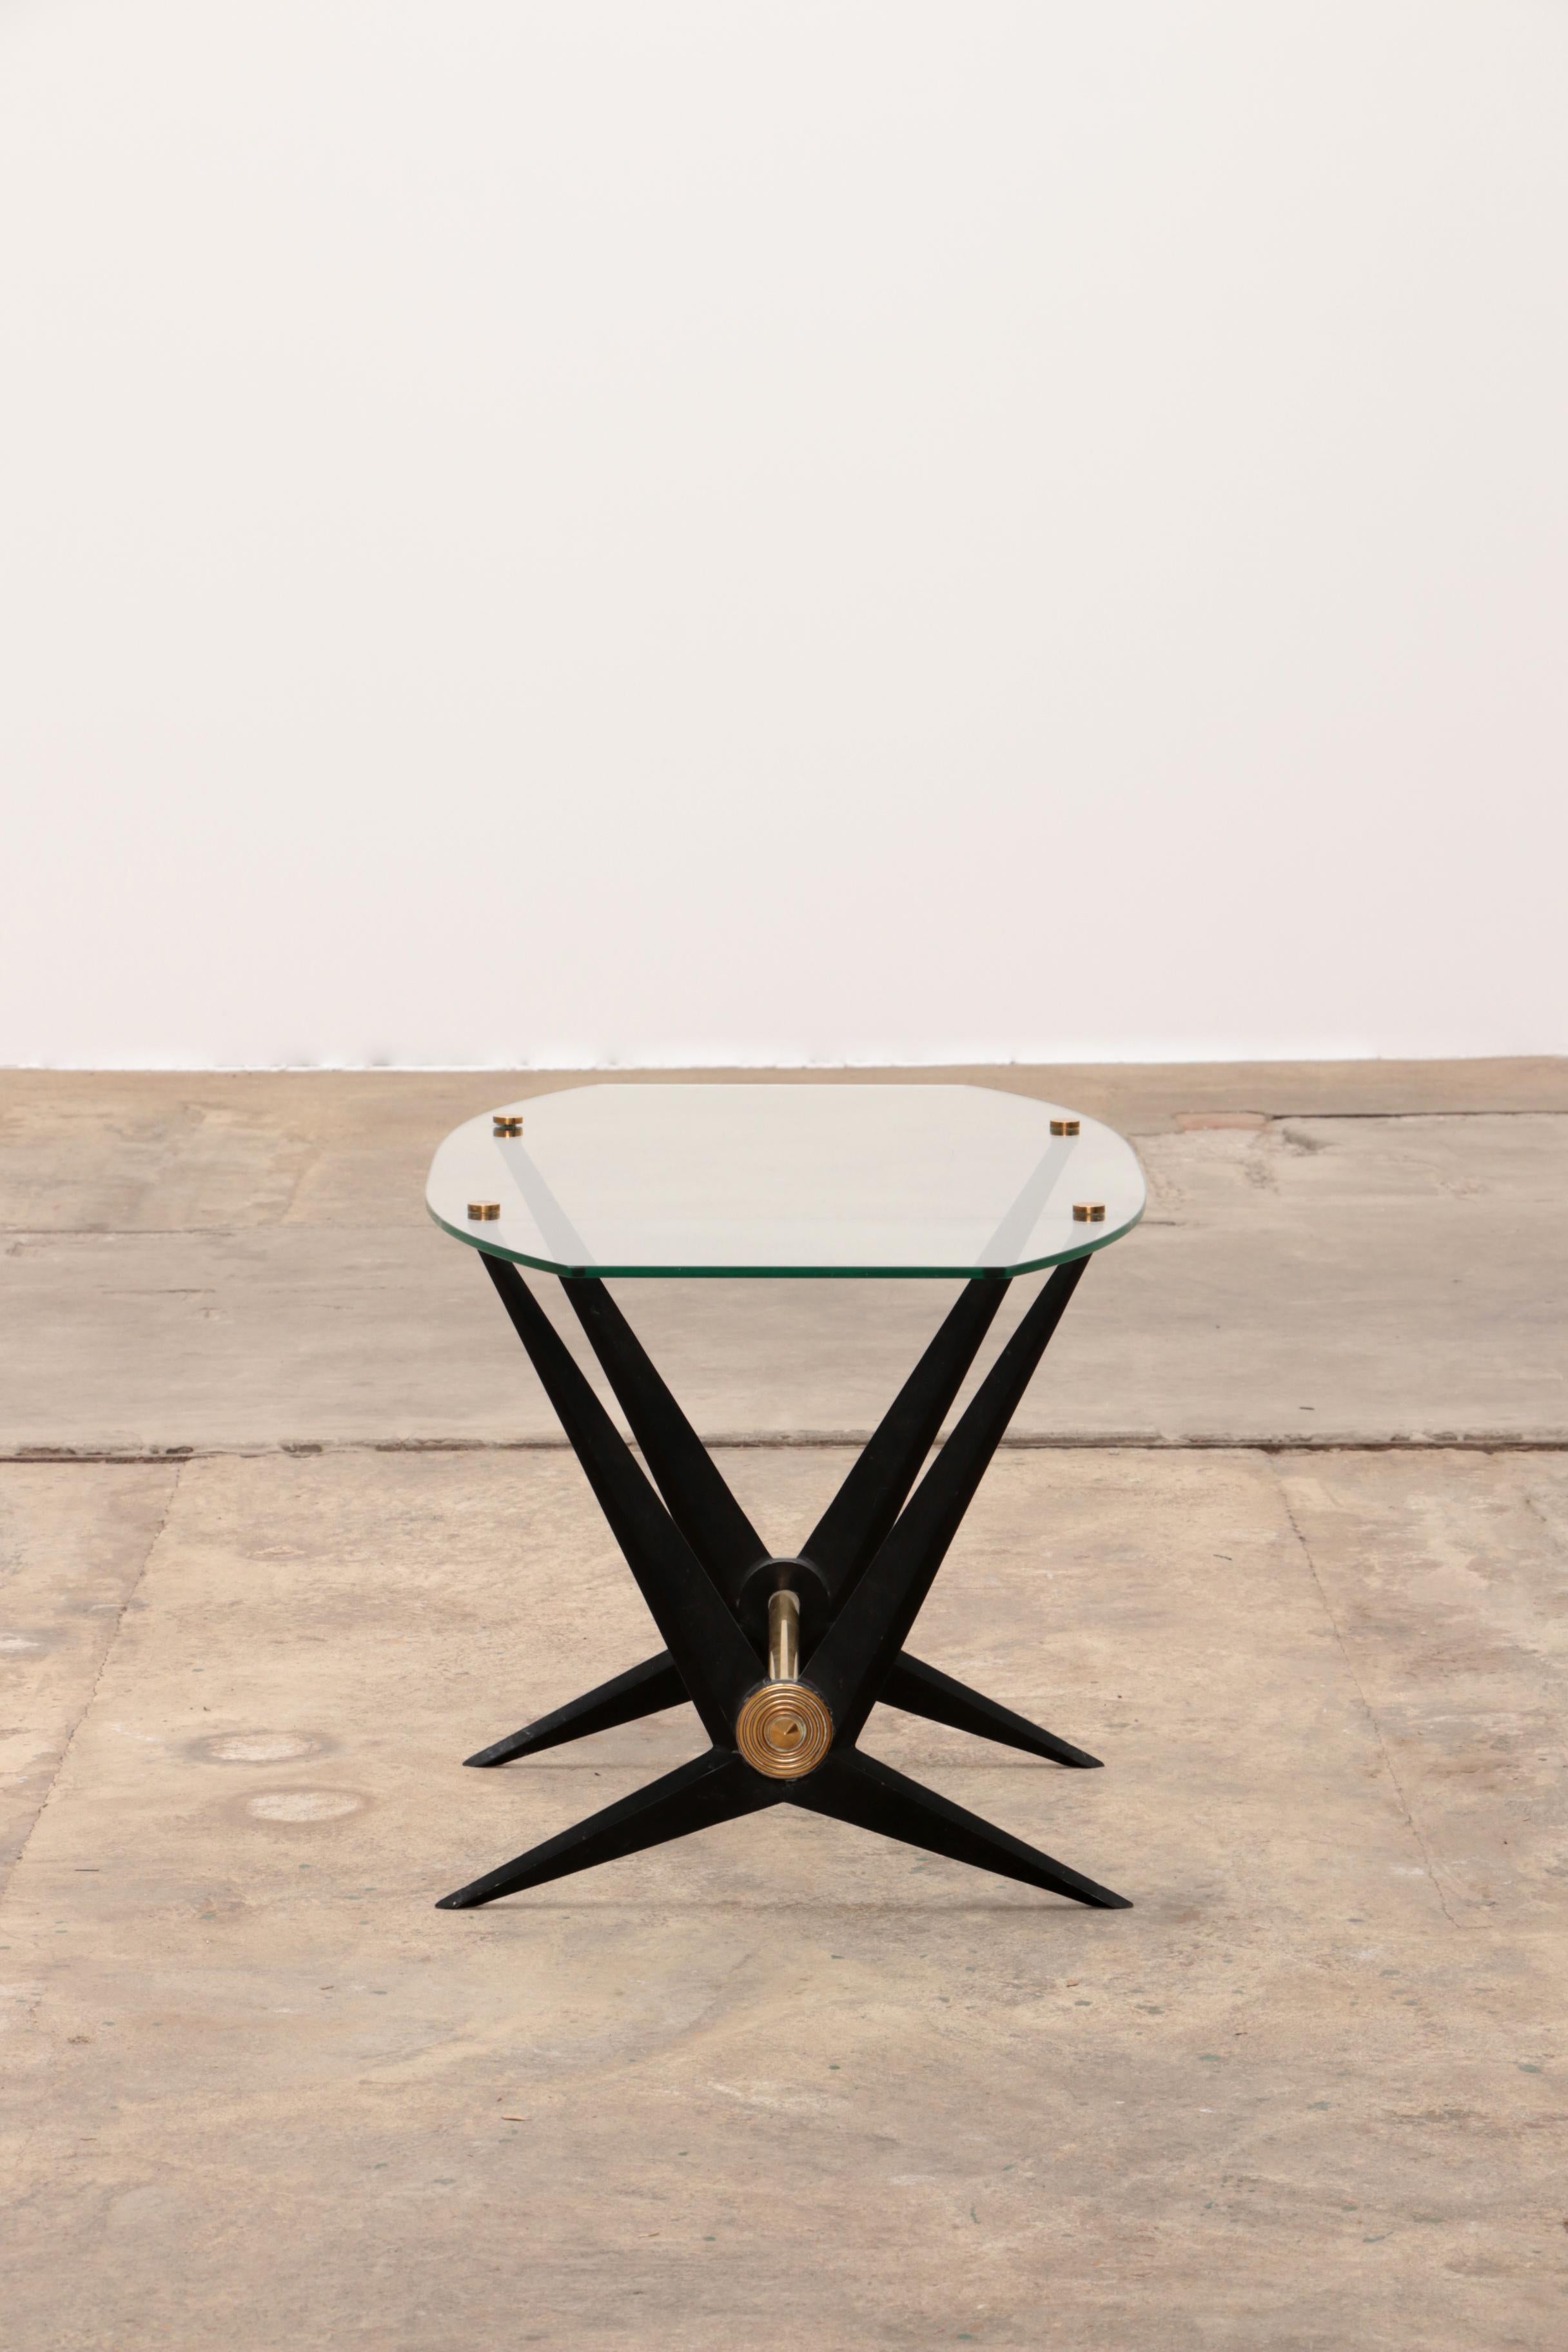 Mid-20th Century Italian Table Design by Angelo Ostuni 1950, Italy For Sale